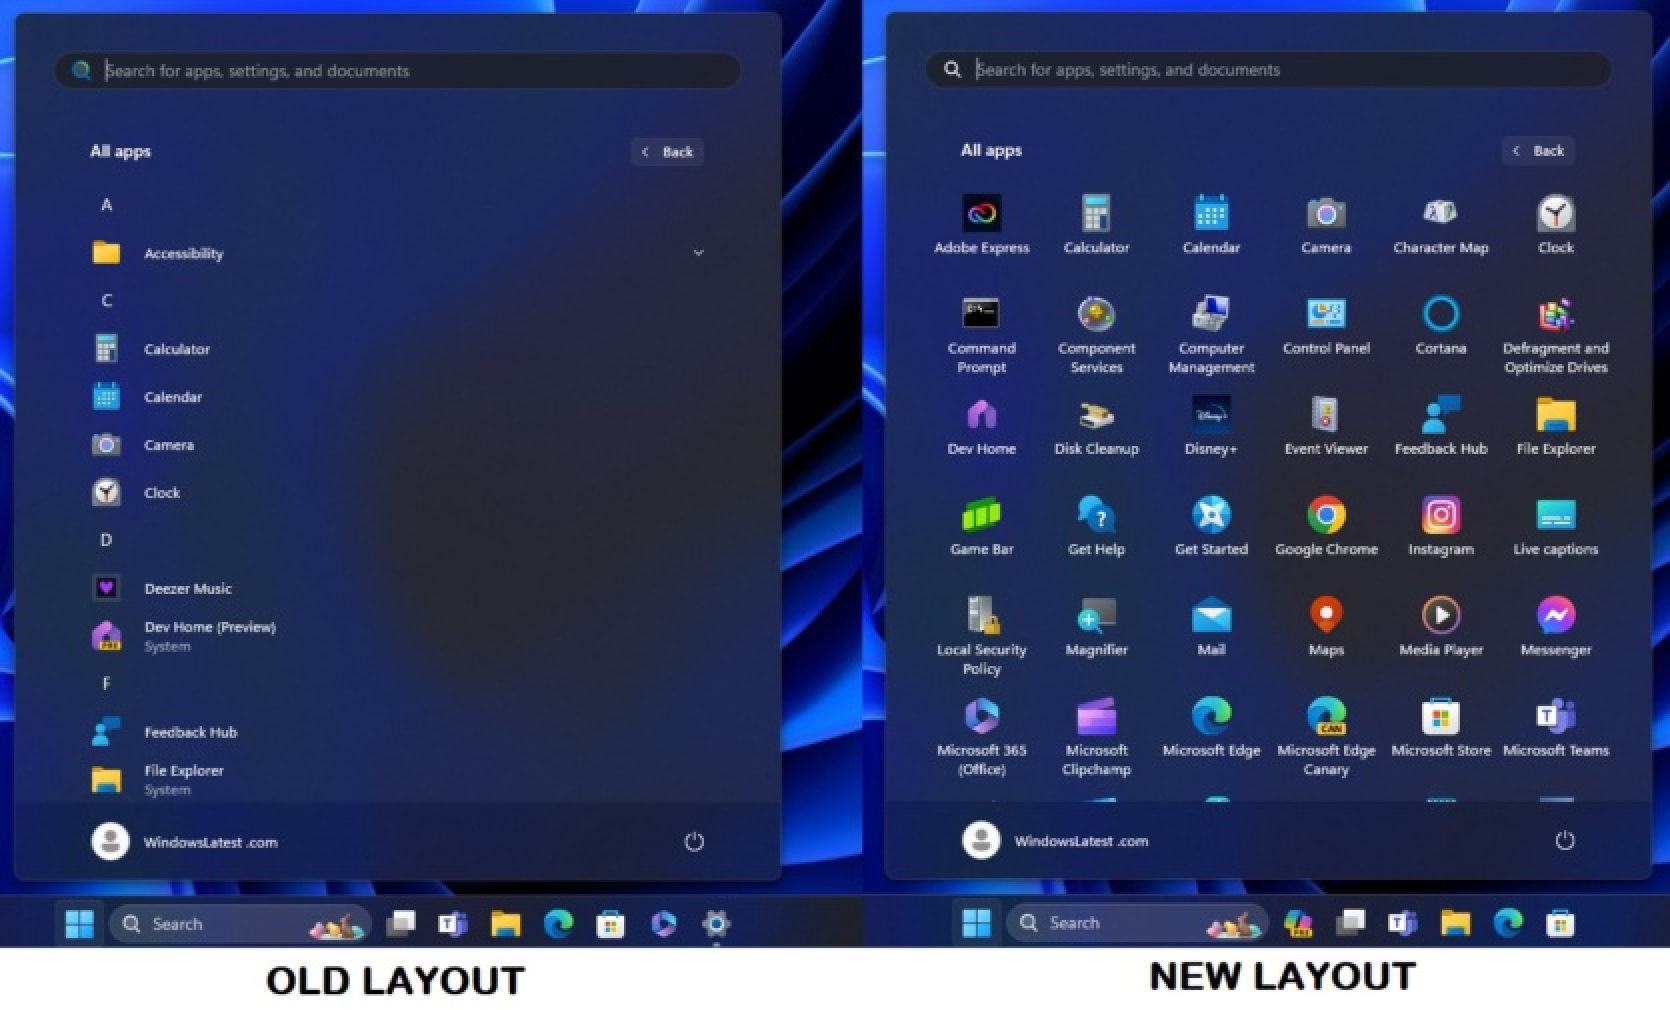 Microsoft is testing a grid layout for programs in the Start menu in Windows 11